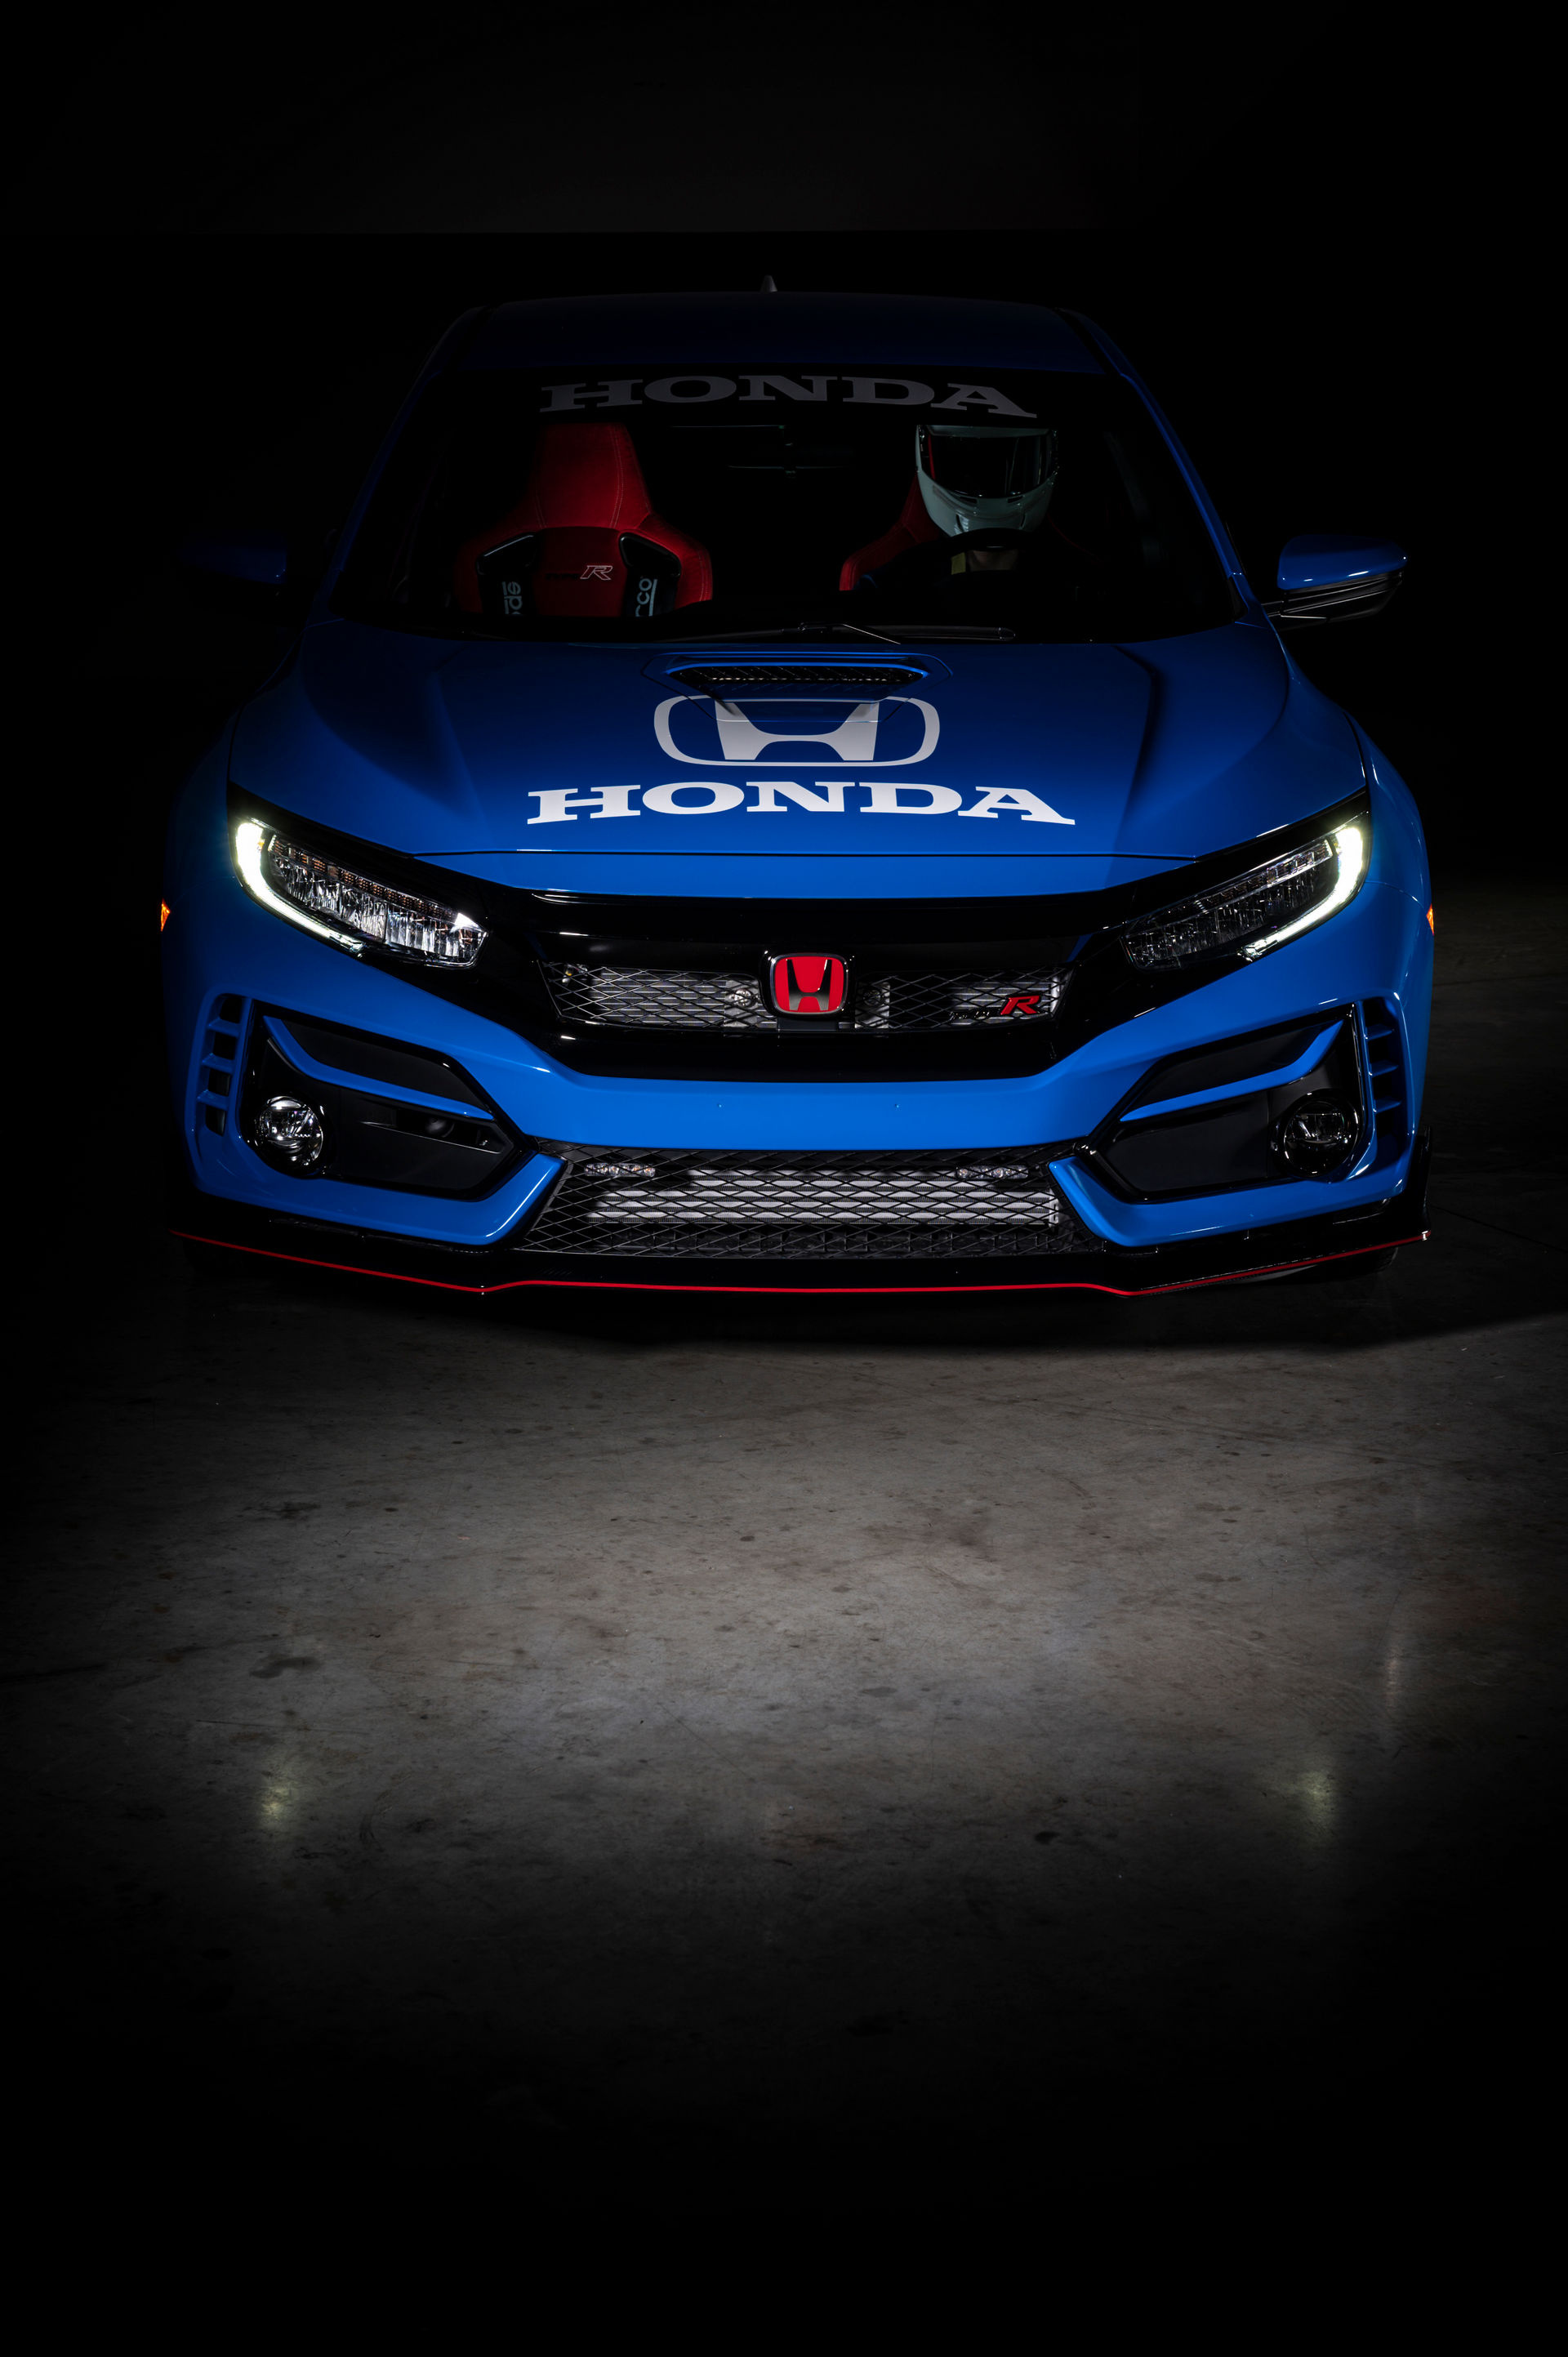 Honda Civic Type R, Pace car front view, Phone wallpapers, Speed and style, 1920x2890 HD Handy